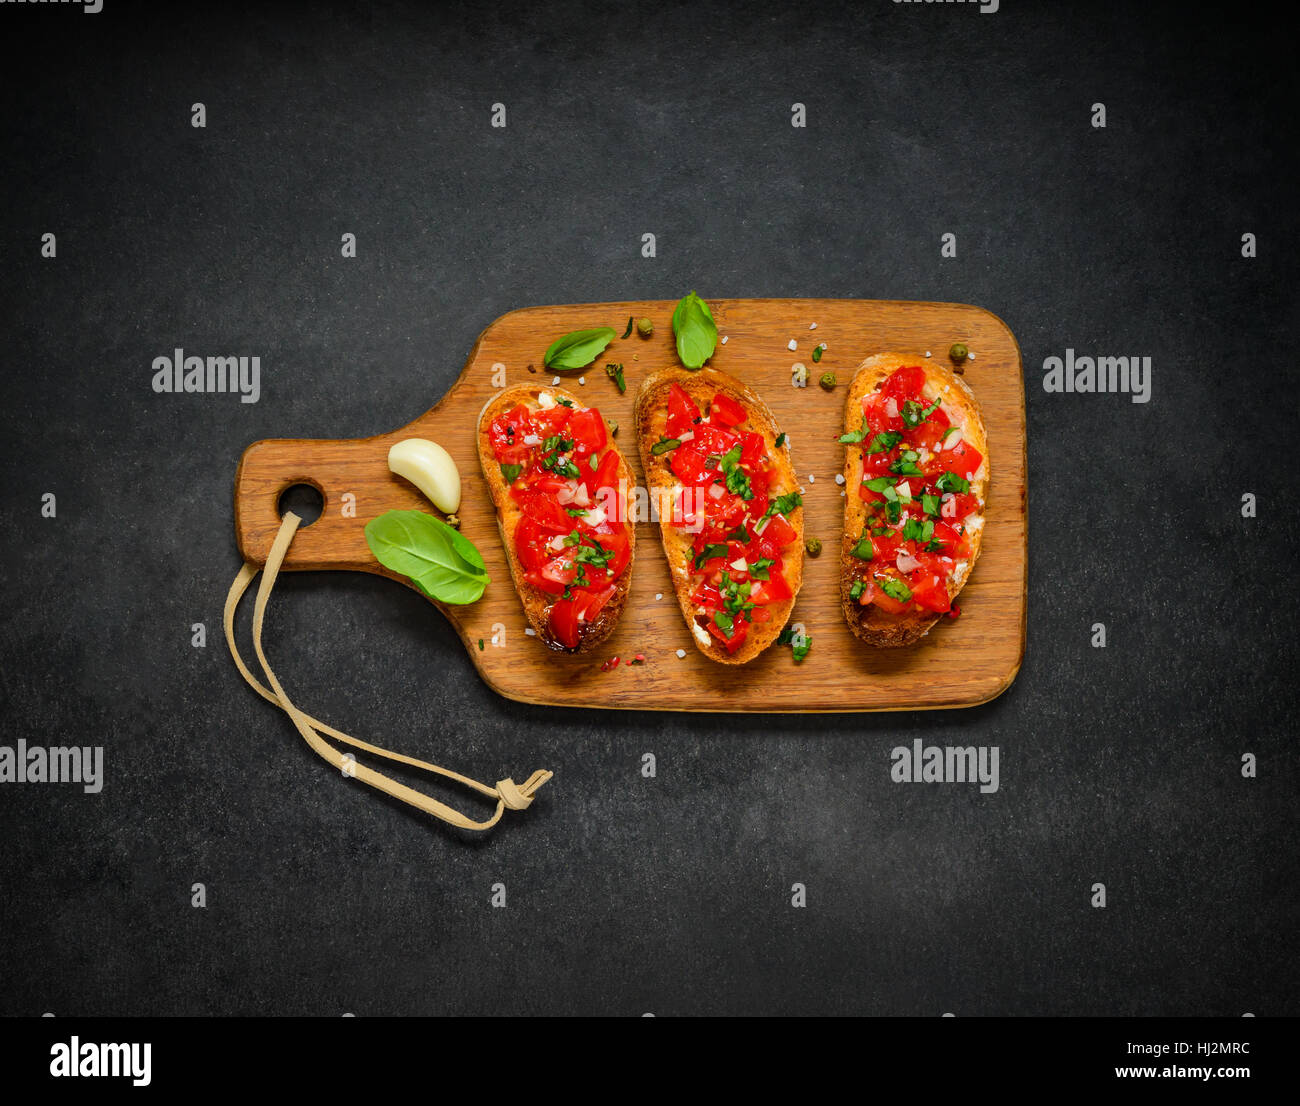 Bruschetta Italian Food or Mediterranean Cuisine with Tomato and Basil on Wooden Chopping Board Stock Photo